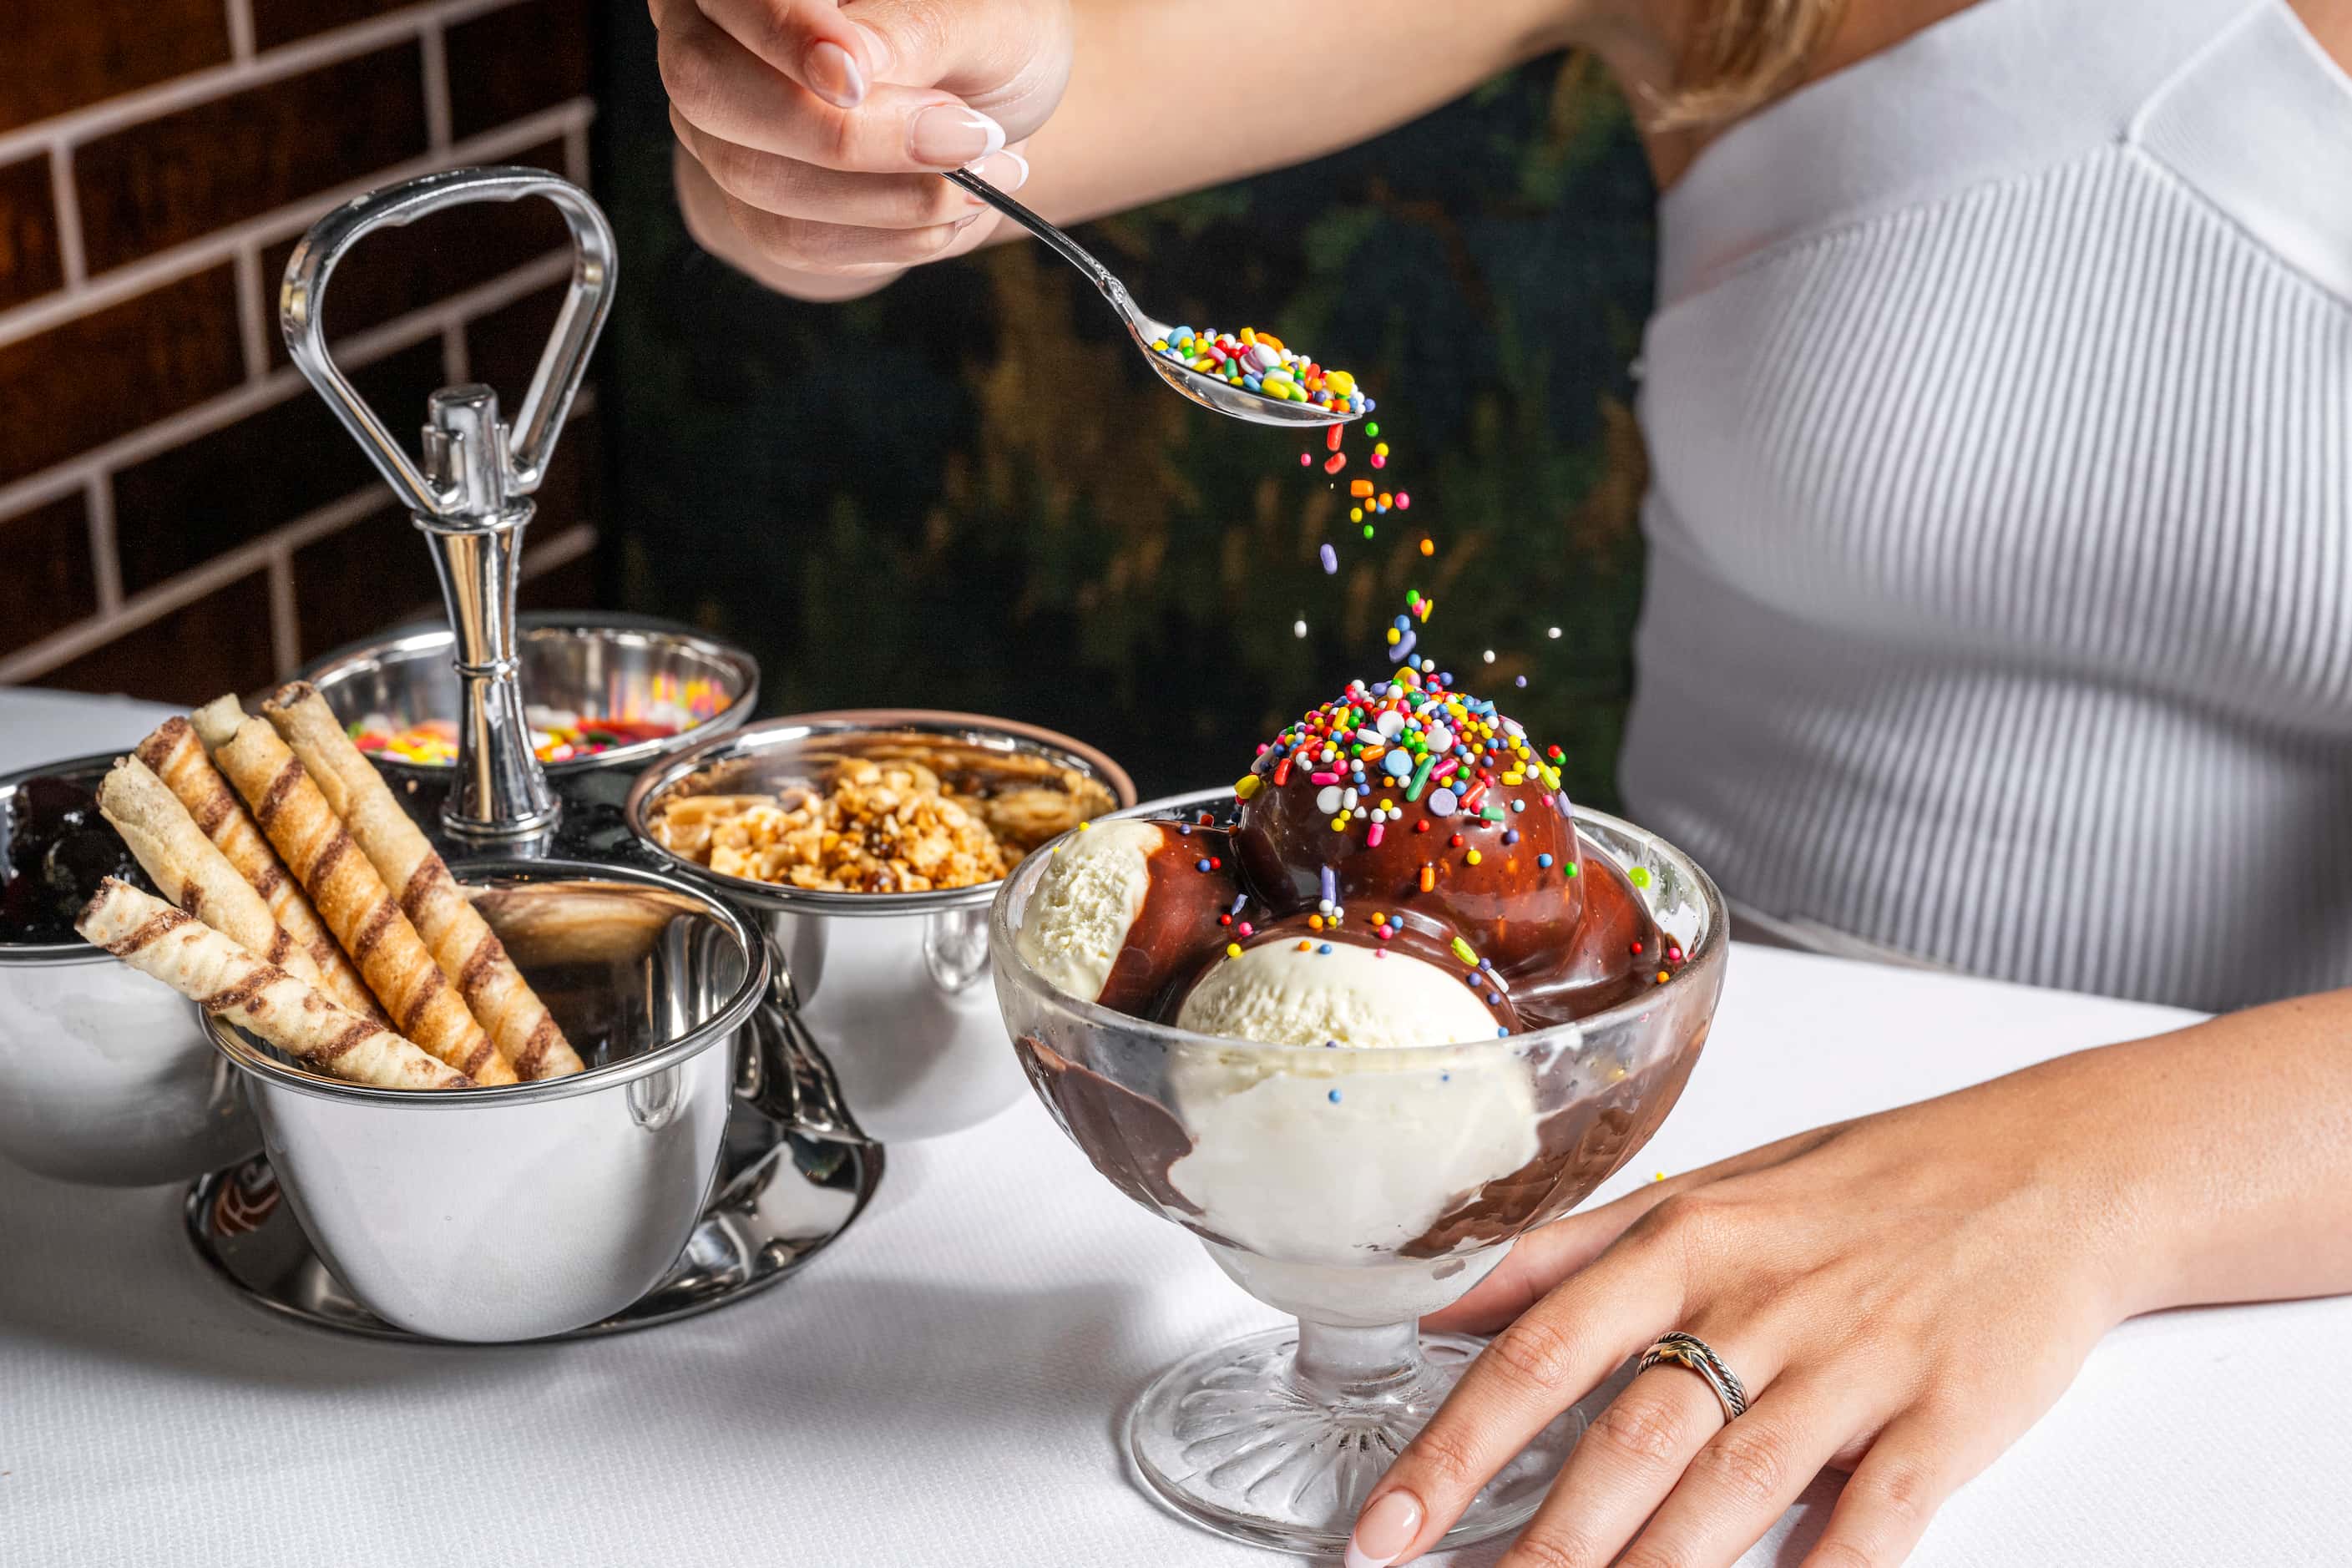 One of the four desserts on Mister Charles' menu is a sundae. It was created to honor the...